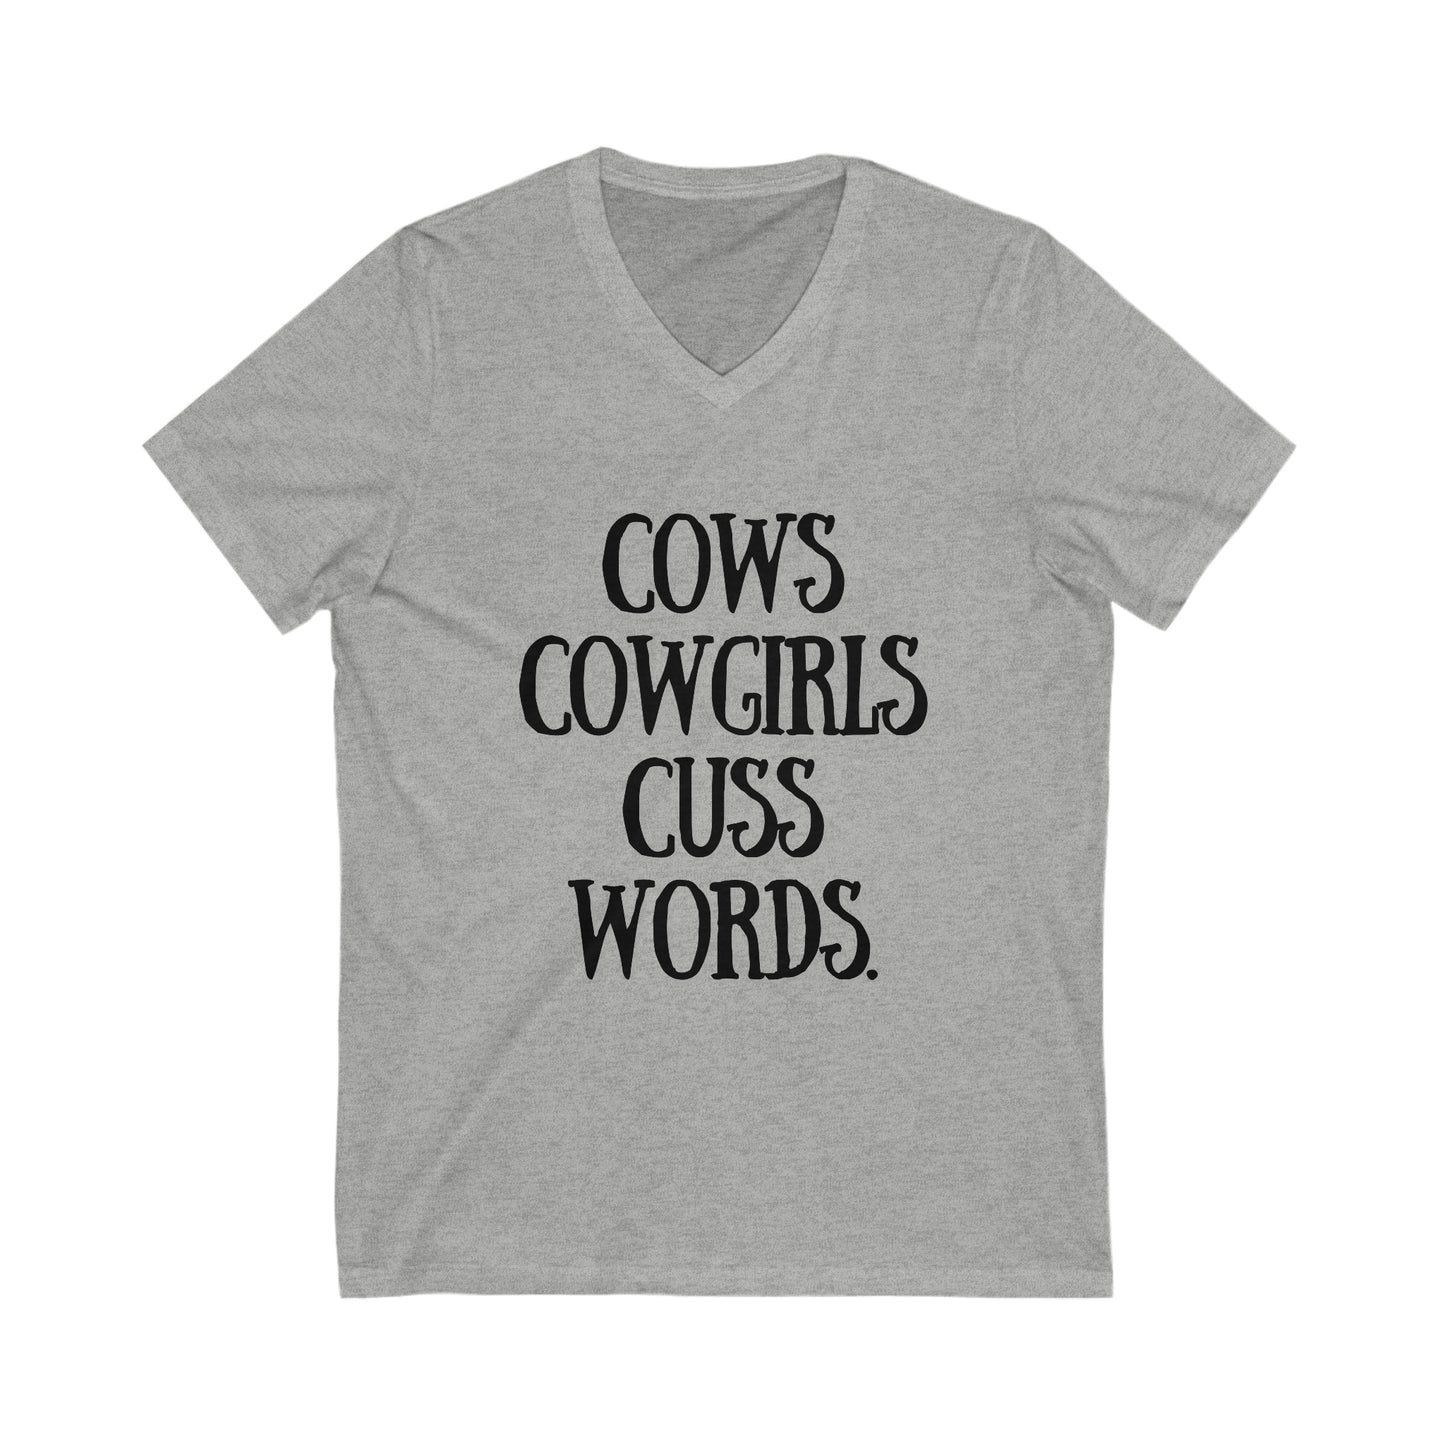 Cowgirl Shirt Cow Gift Cusswords Funny Farmer Shirt Unisex Jersey Short Sleeve V-Neck Tee